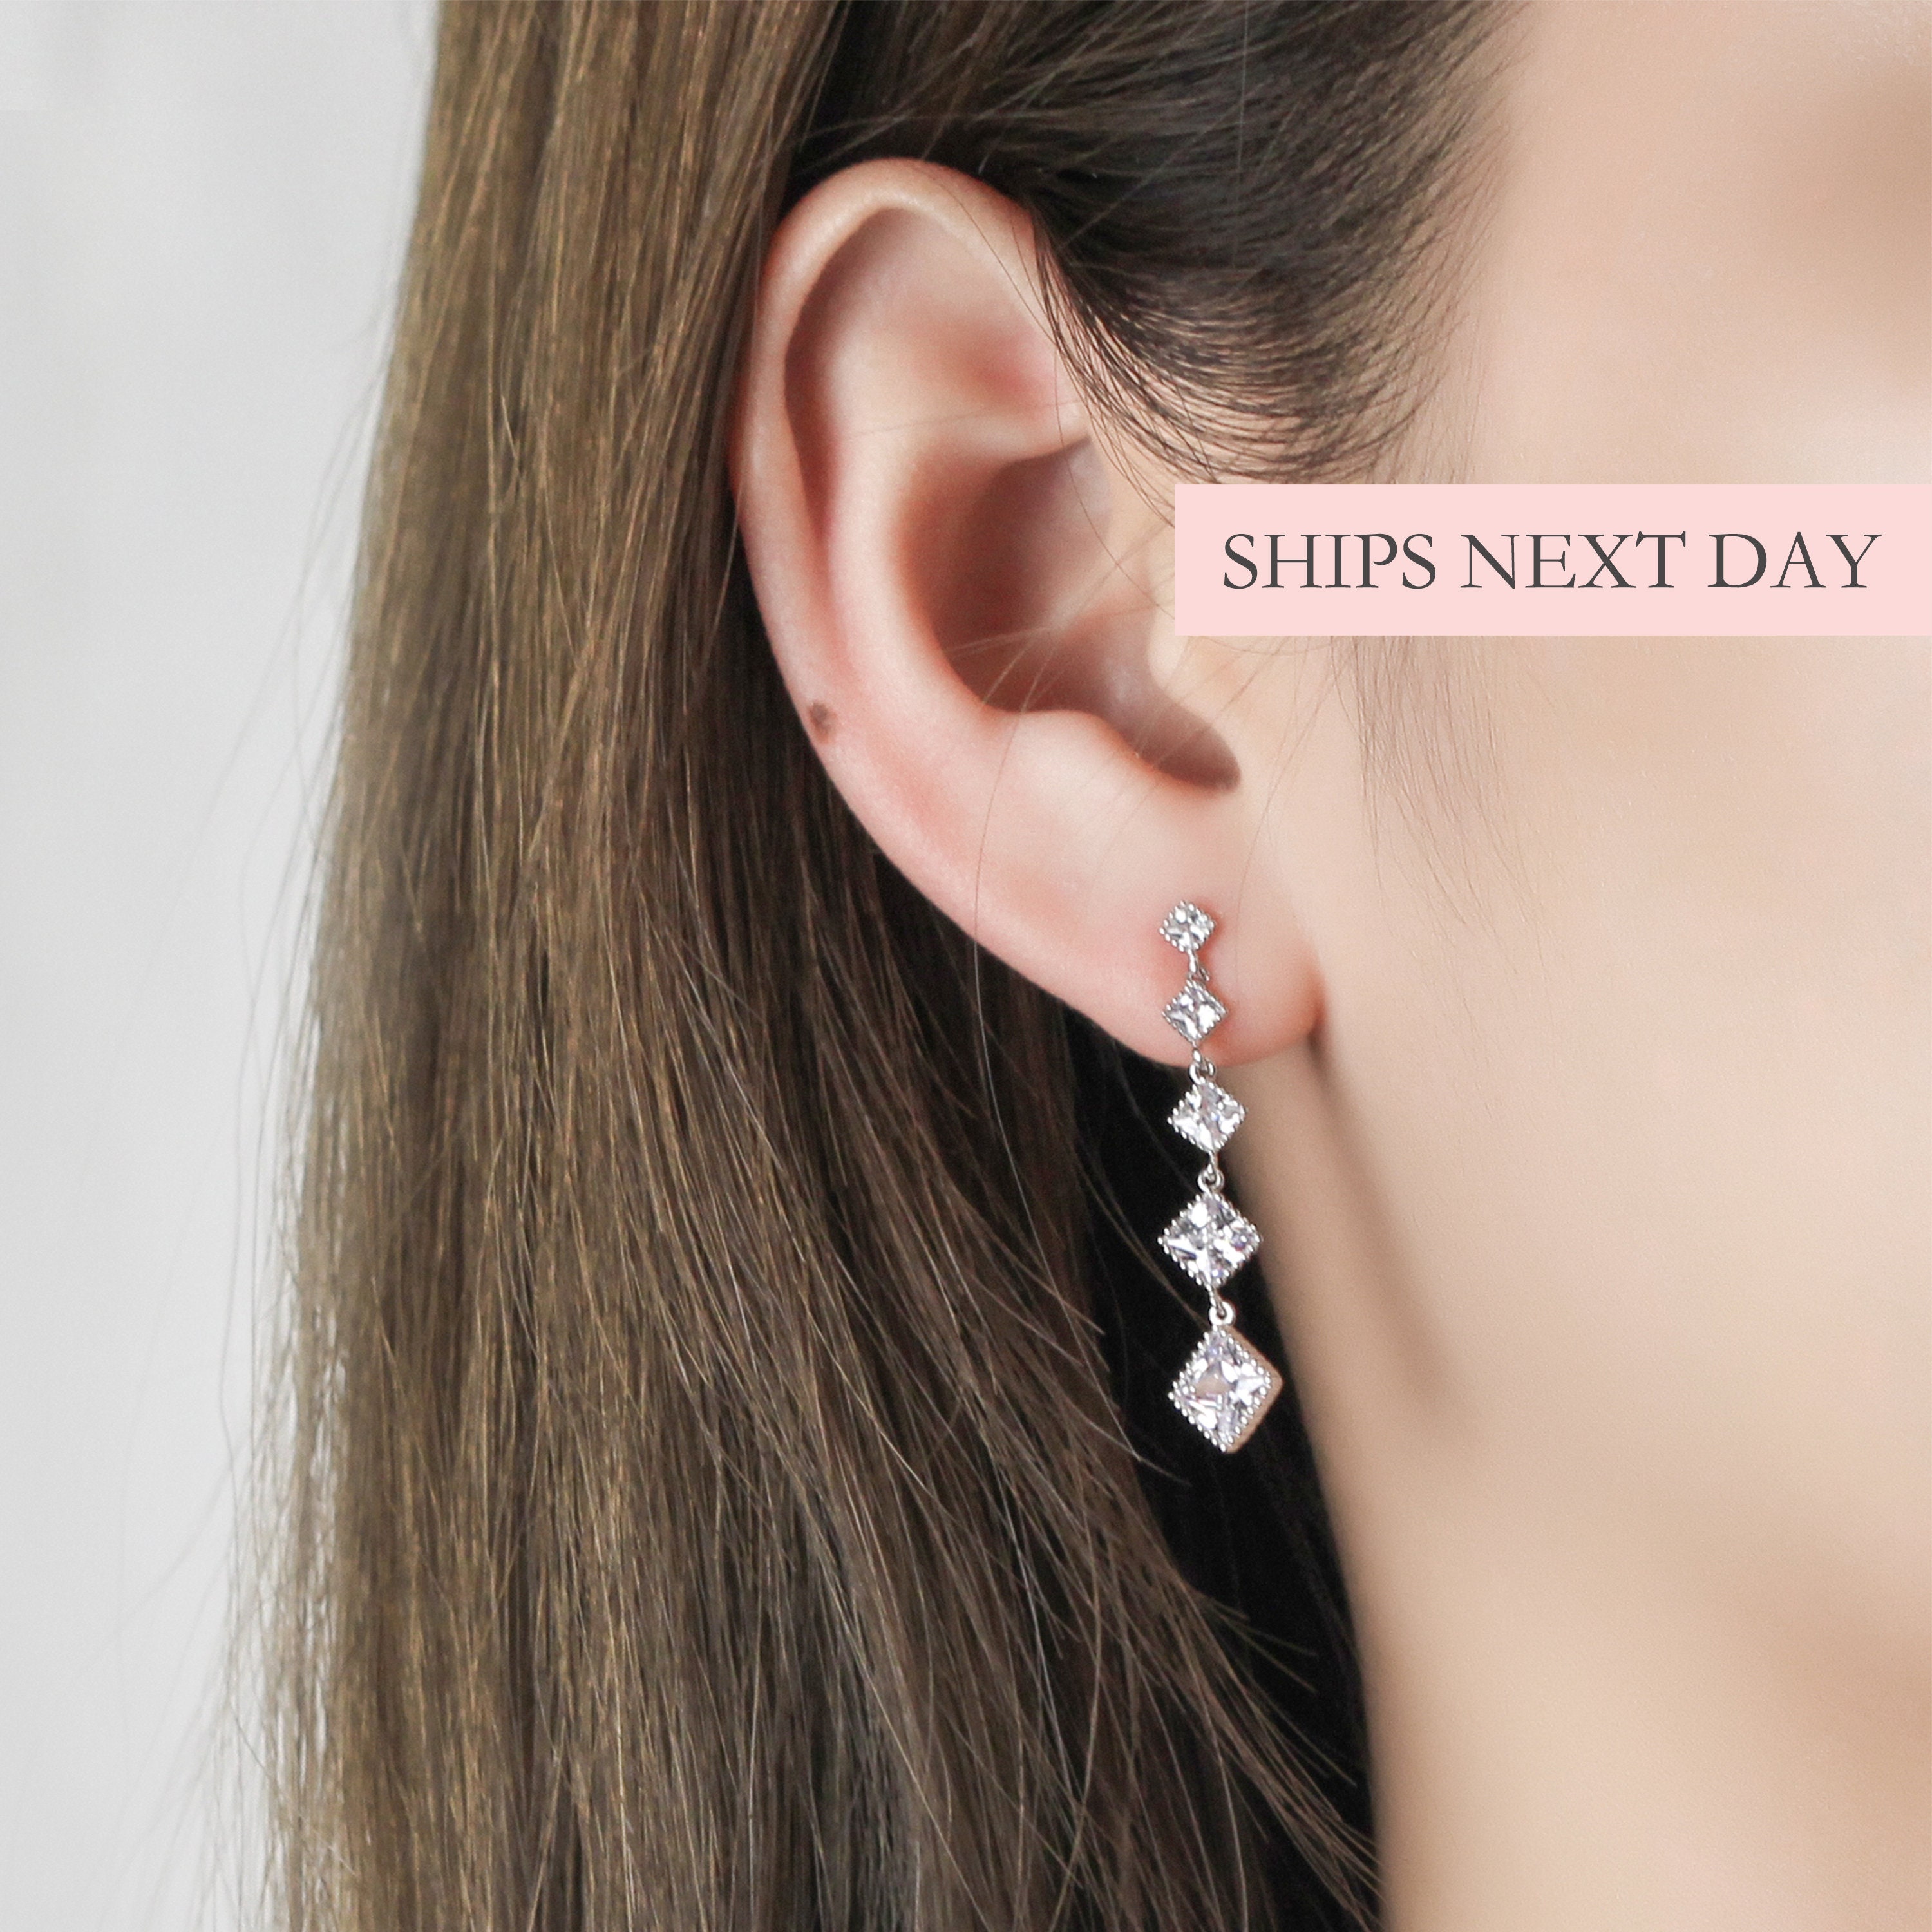 Details about   Handmade Sterling Silver .925 Spotted Designed Diamond Shape Dangle Earrings. 